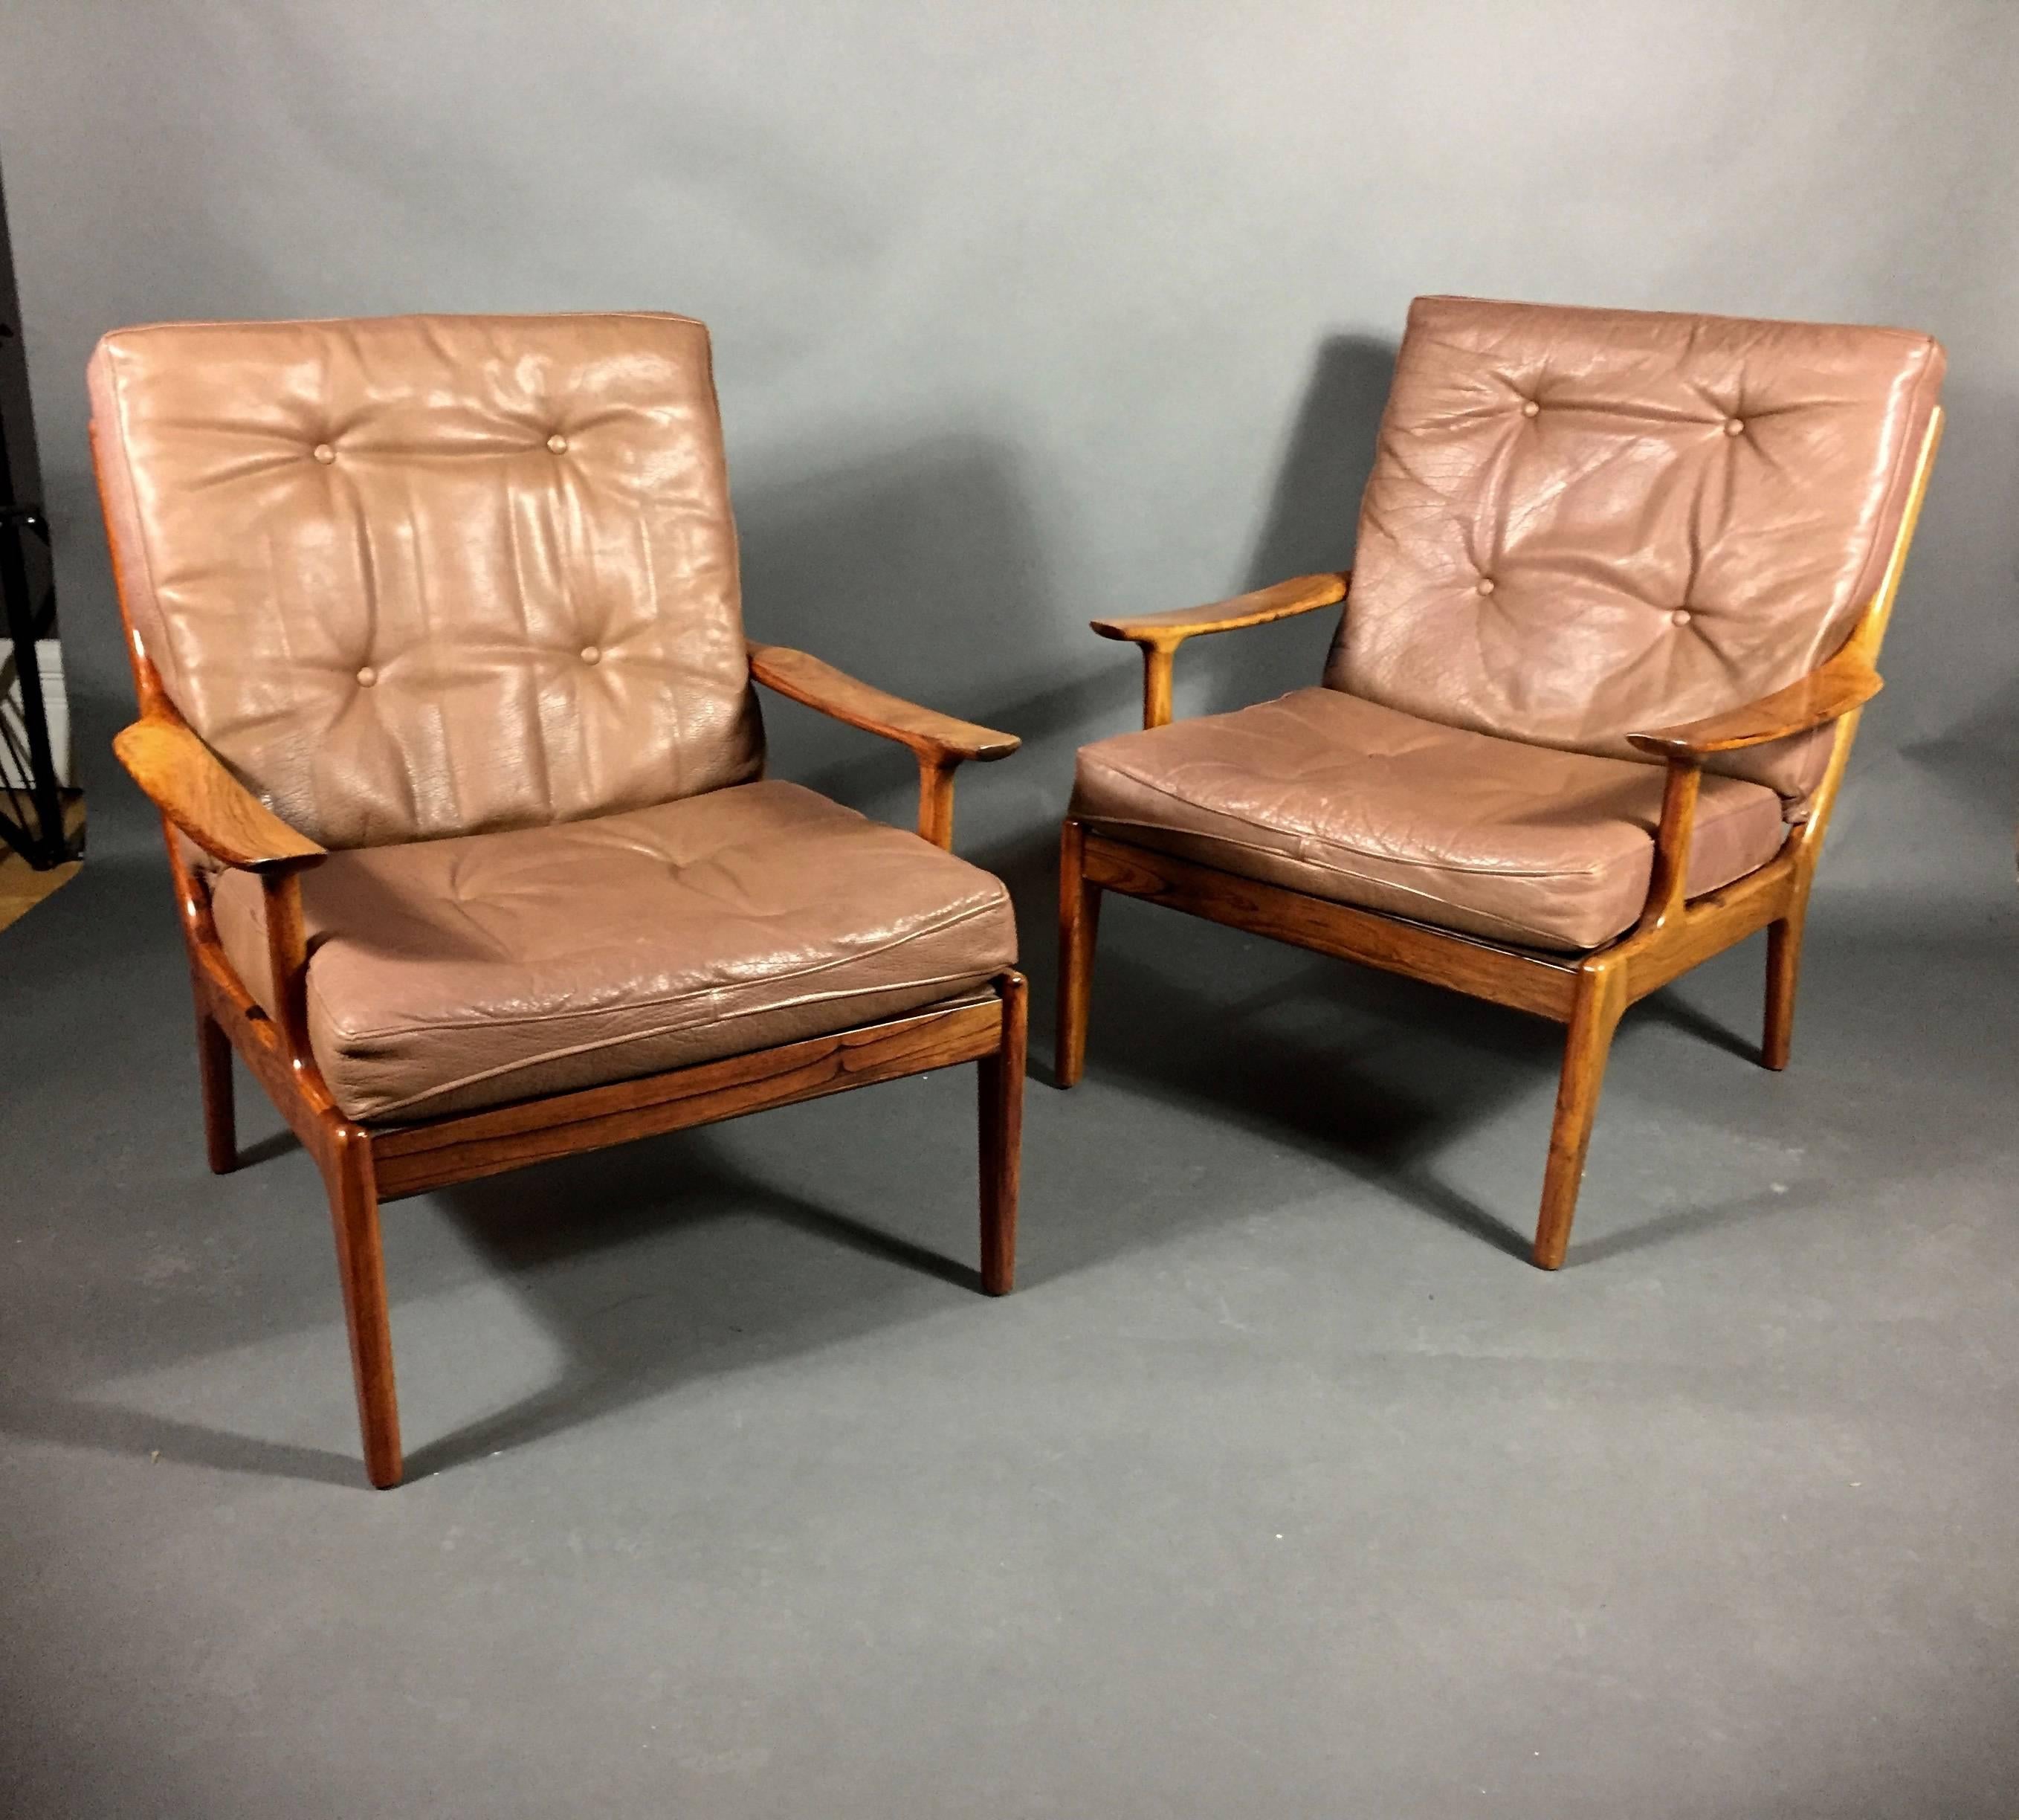 Beautiful proportions and simplicity of lines on these solid rosewood frames are covered in a heavy patinated and buttoned leather. Danish design, circa 1970. Rosewood finish lighter than original though consistent overall to visible frame.